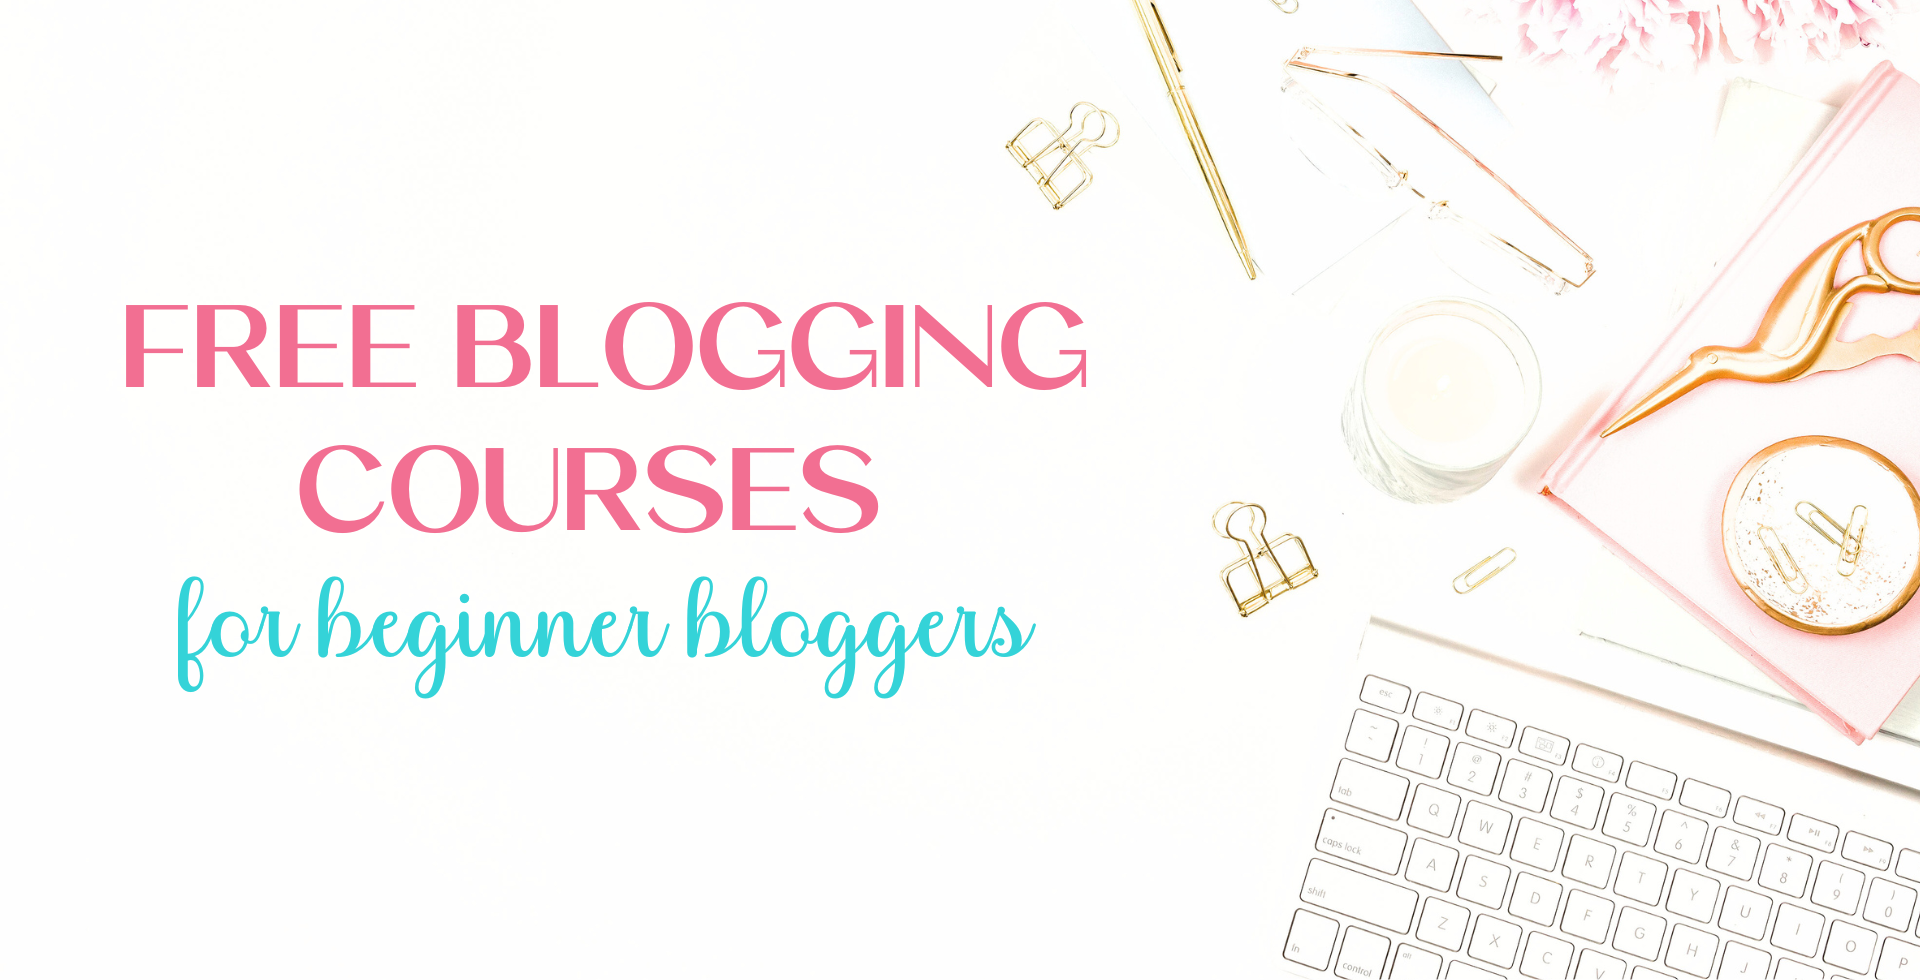 free blogging course for beginner bloggers - featured image